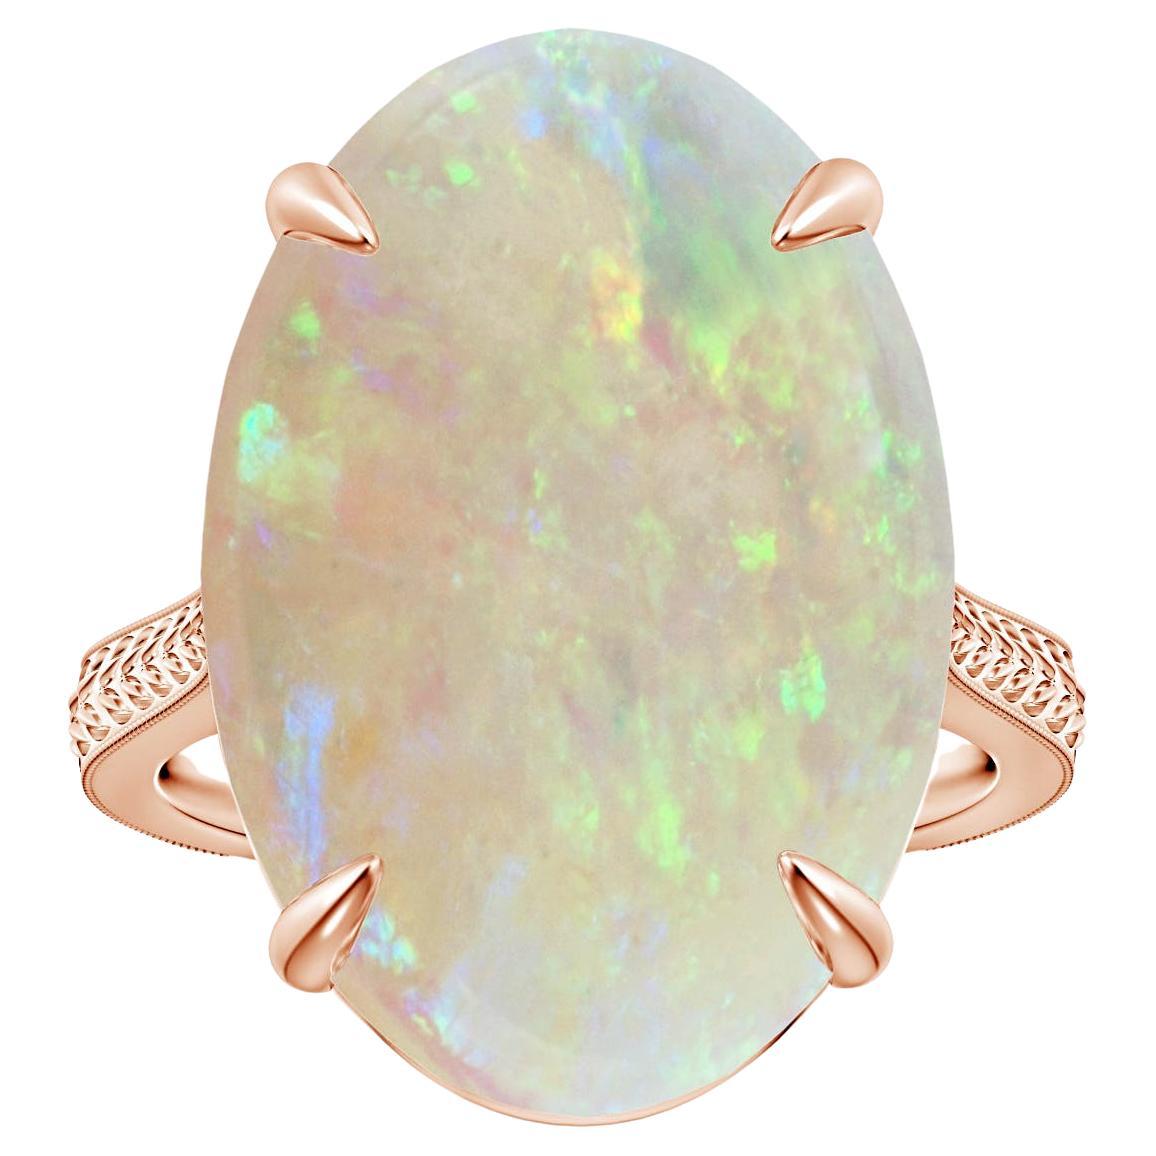 Angara Gia Certified Solitaire Opal Ring in Rose Gold with Leaf Motifs